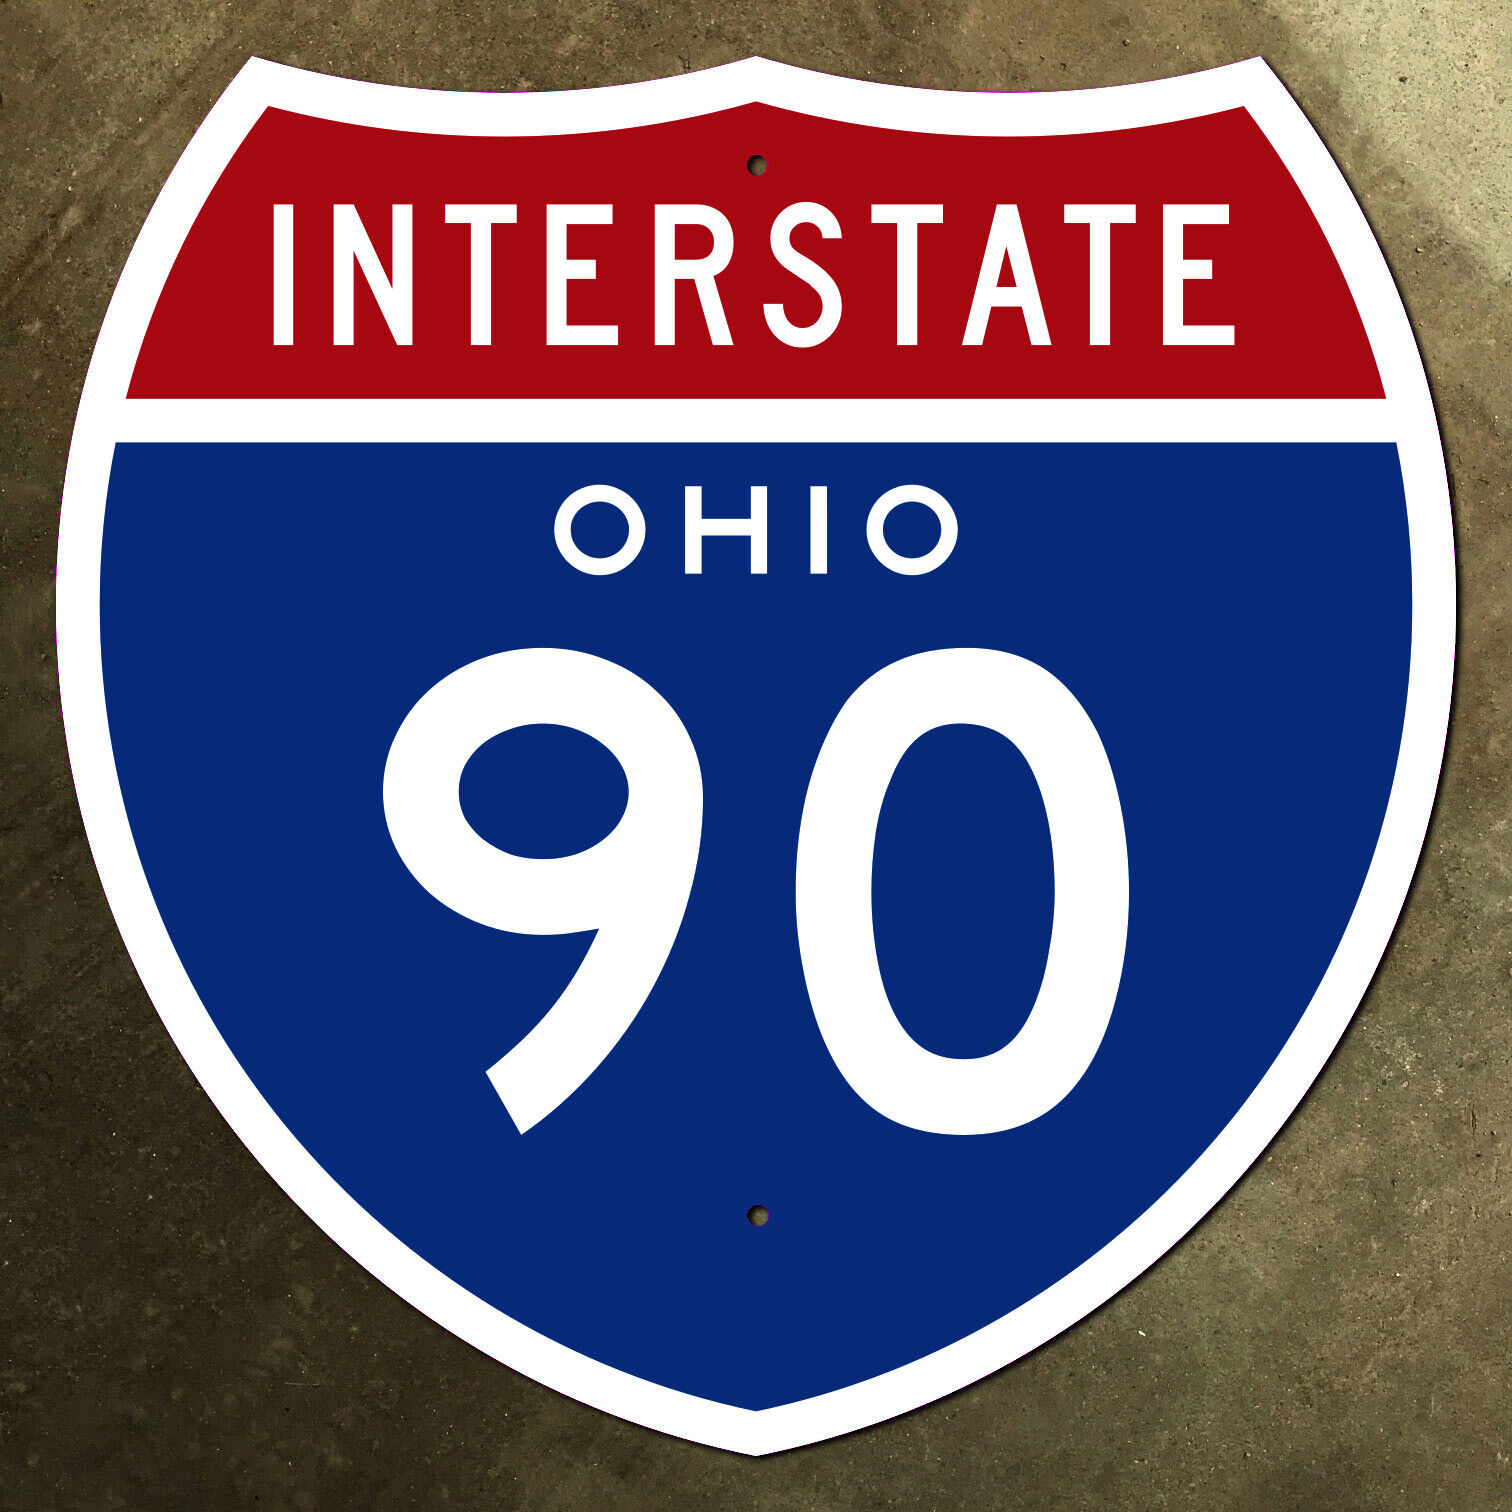 Ohio interstate route 90 highway marker road sign 1957 Turnpike Cleveland 18x18